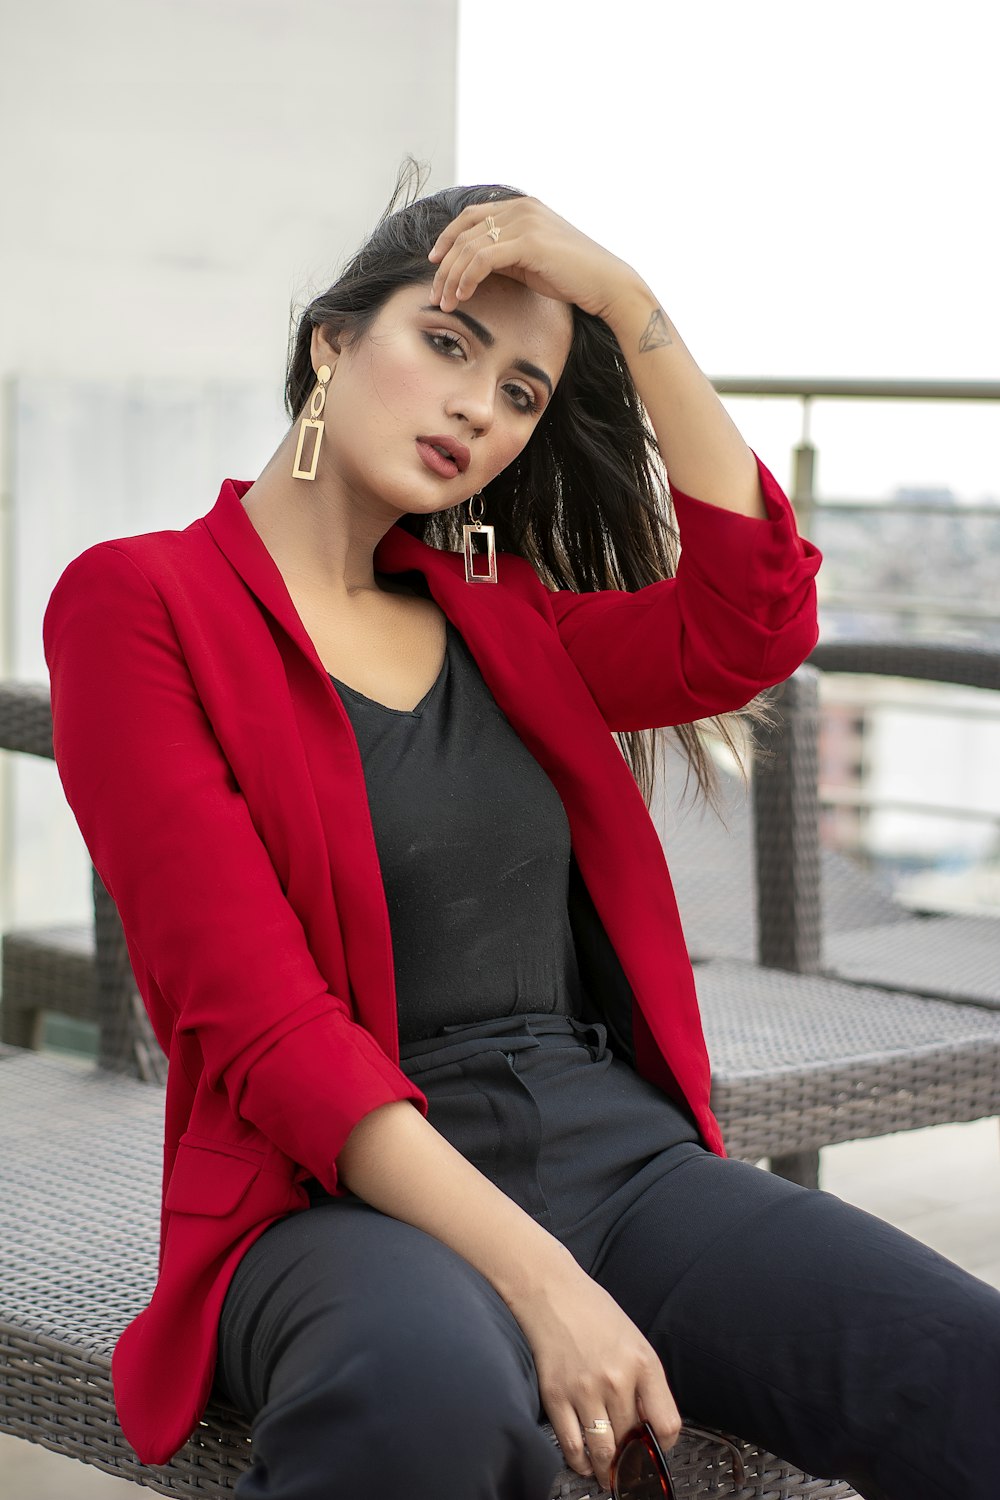 woman in red blazer and black shirt sitting on the floor